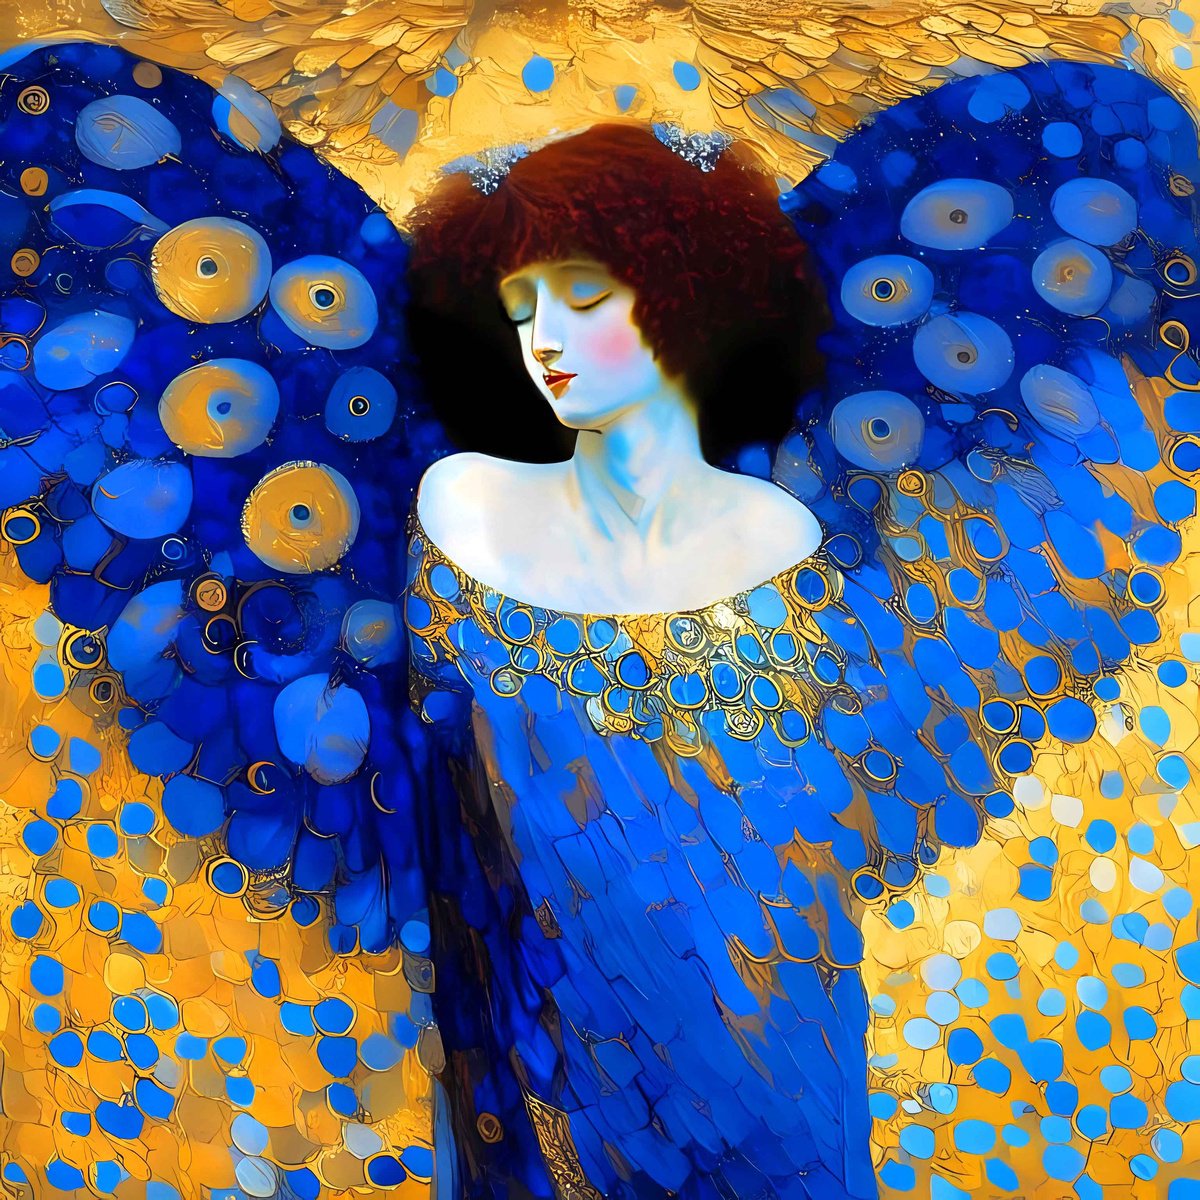 Dreaming Angel - Original oil acrylic computer graphics painting on canvas. Romantic blue... by BAST